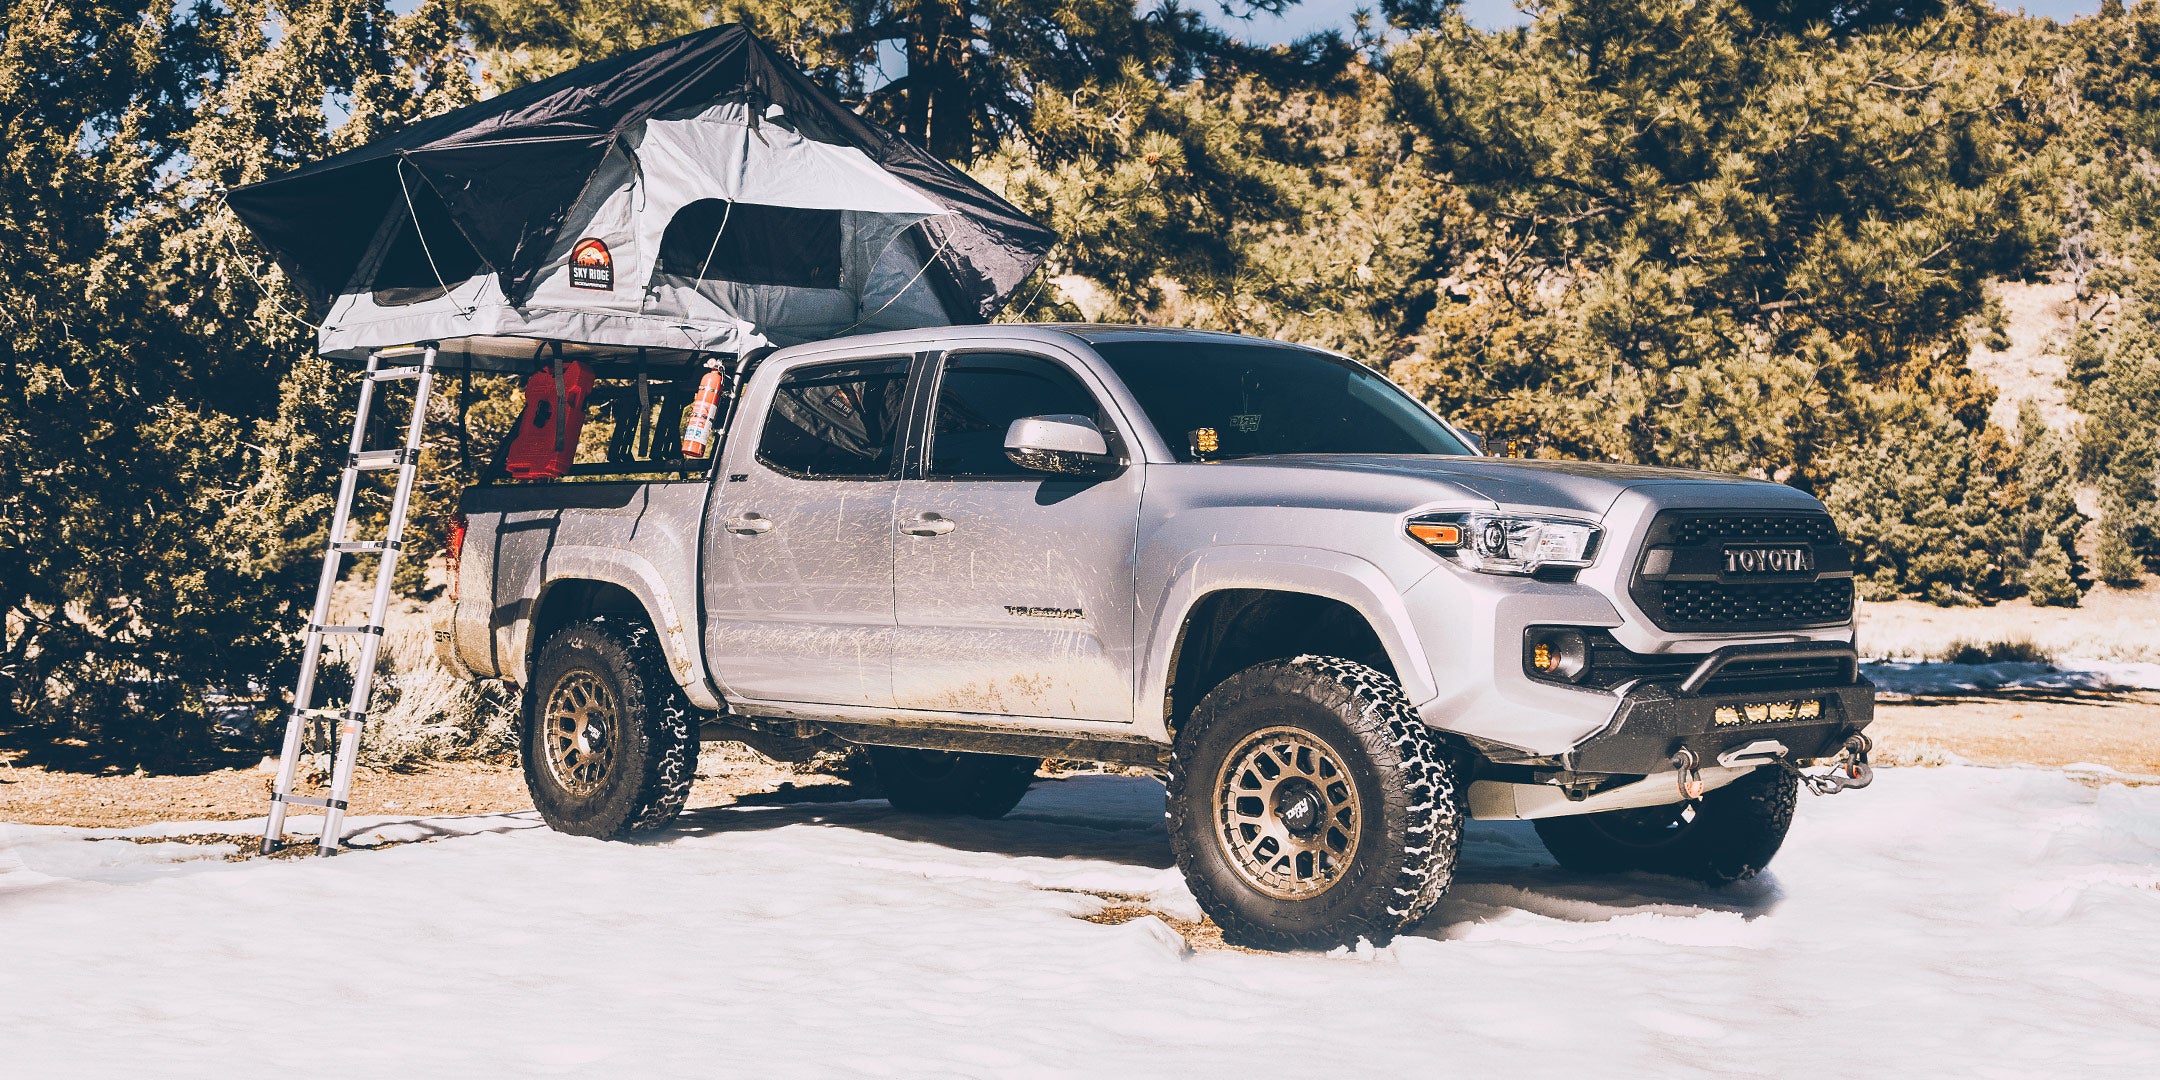 Body Armor 4x4 Sky Ridge roof top tent on the Toyota Tacoma Bed Rack. 